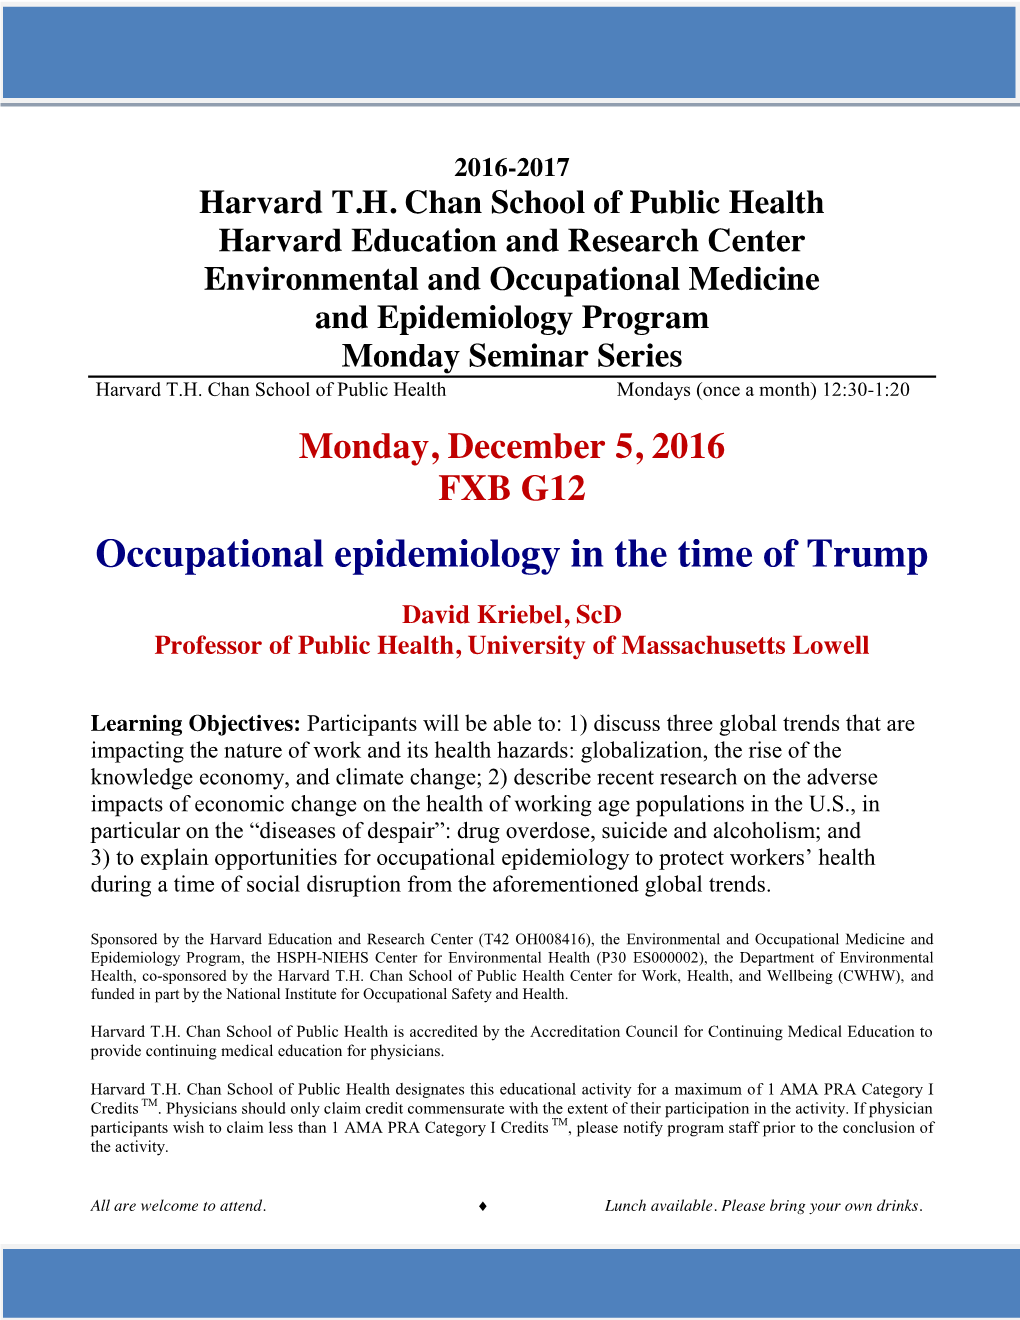 Occupational Epidemiology in the Time of Trump